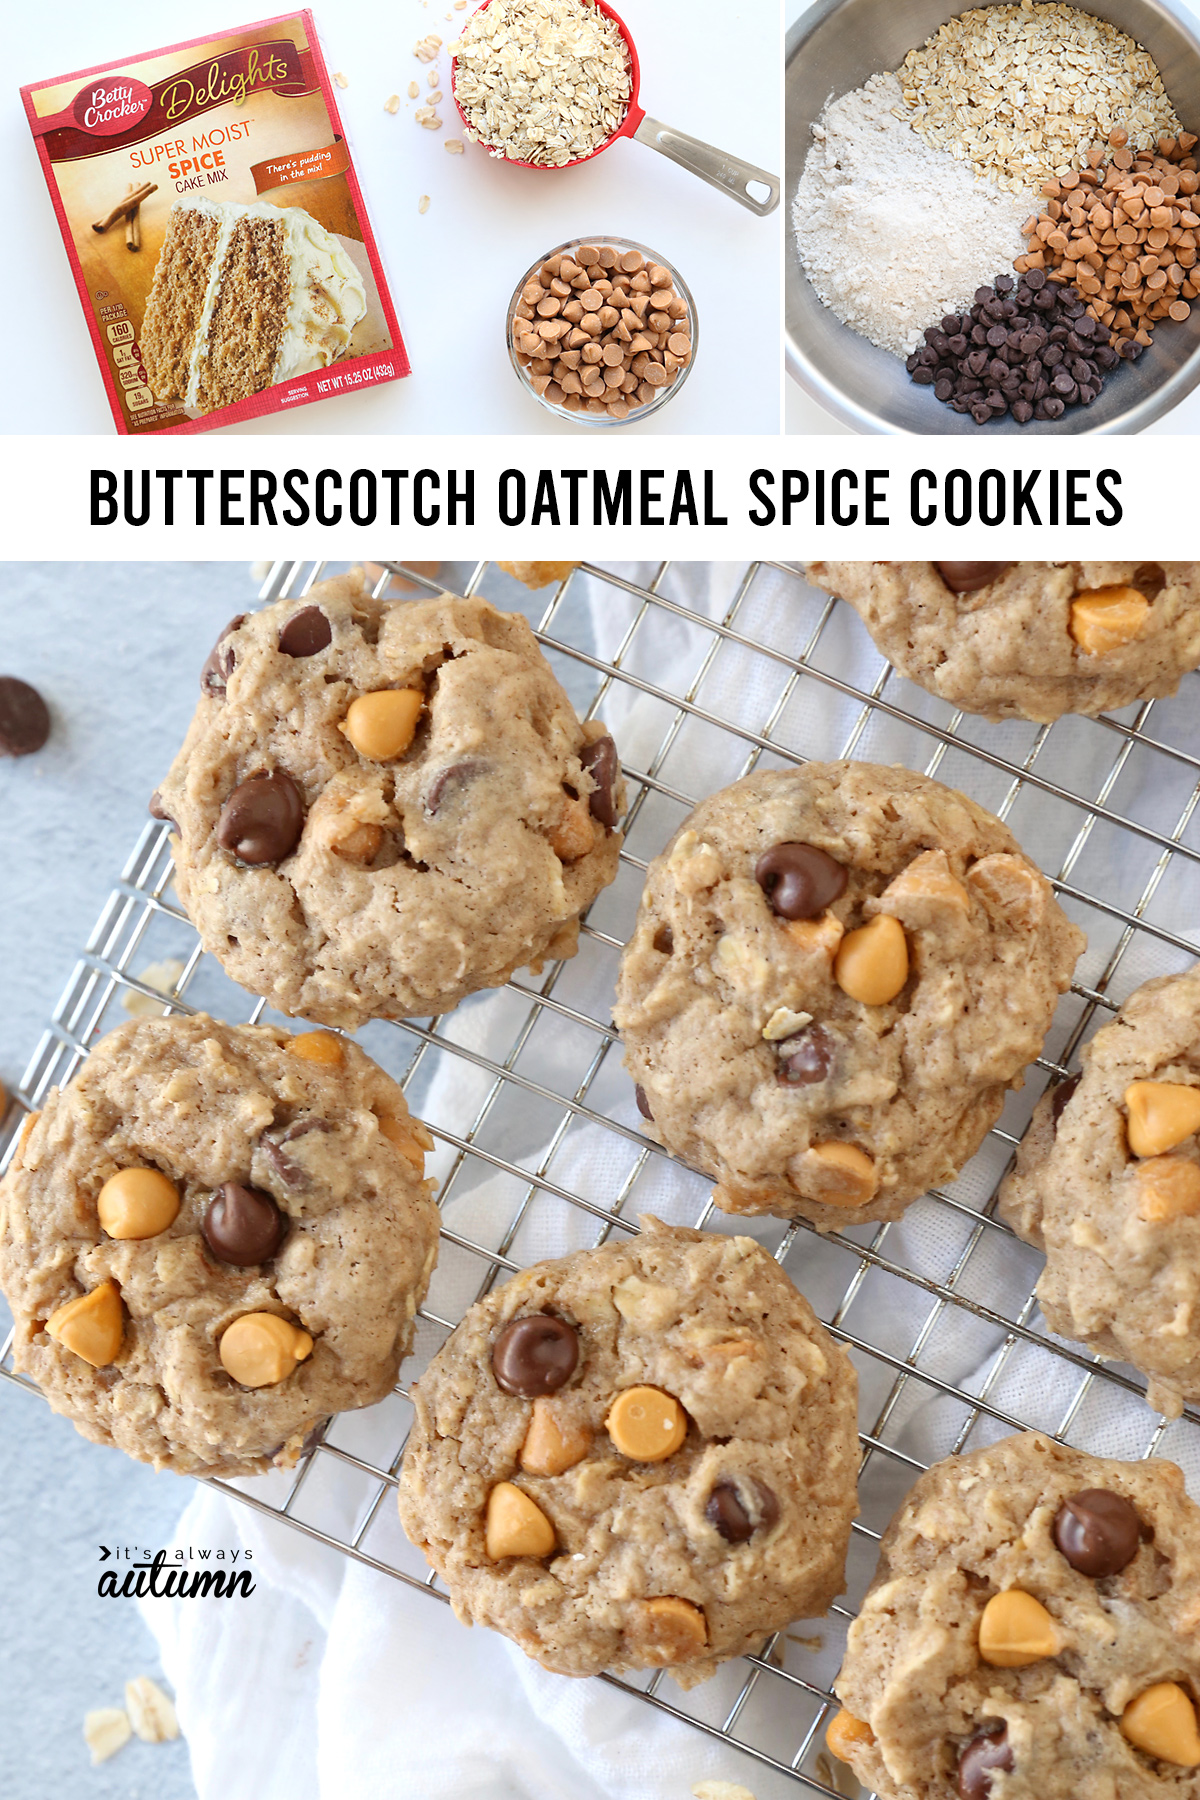 Spice cake mix, oats and butterscotch chips; Oatmeal spice cake mix cookies with butterscotch and chocolate chips 